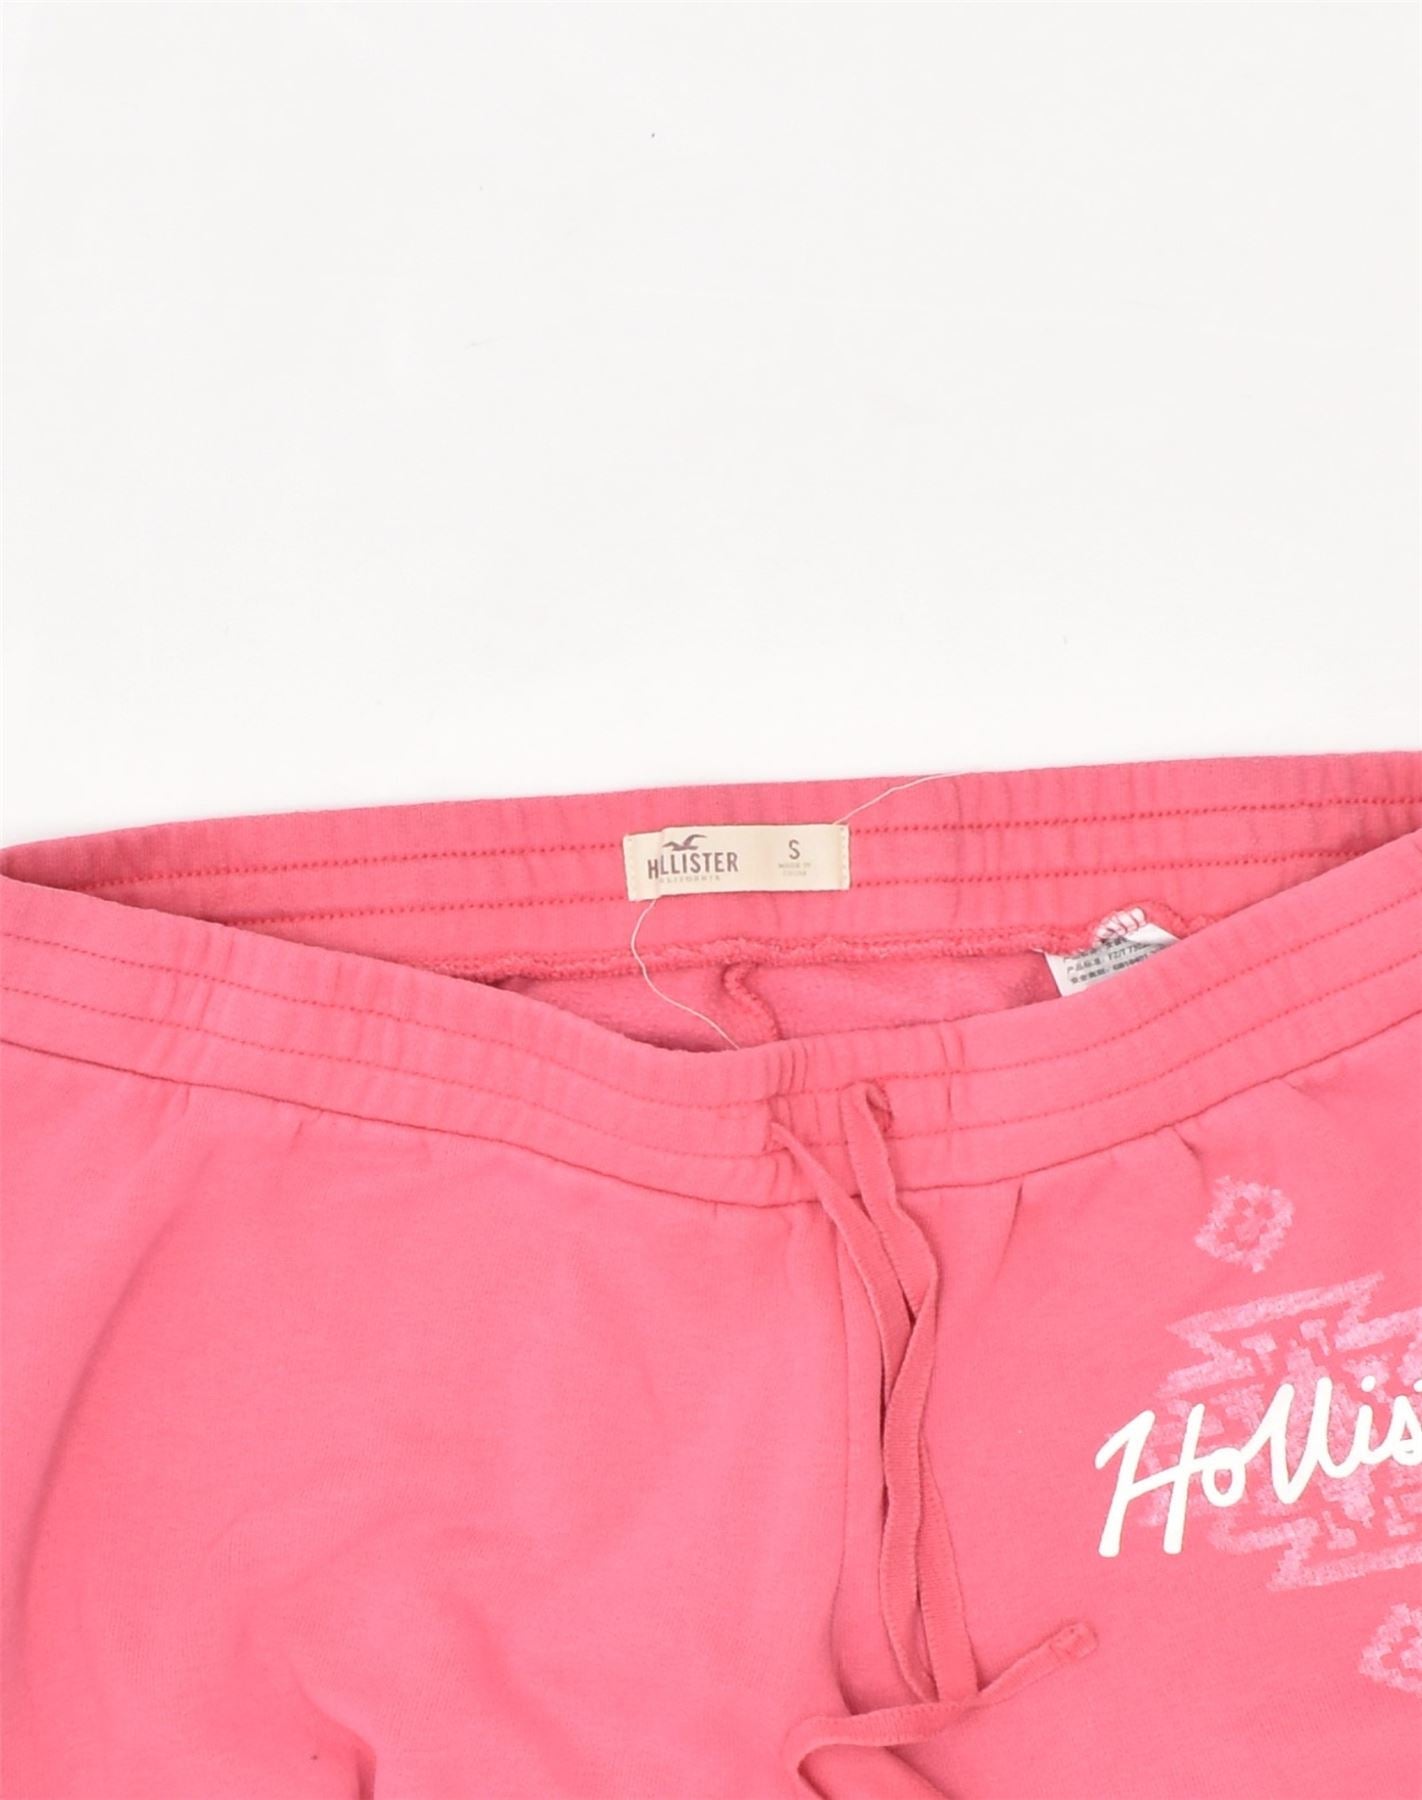 HOLLISTER Womens Graphic Tracksuit Trousers UK 10 Small Pink